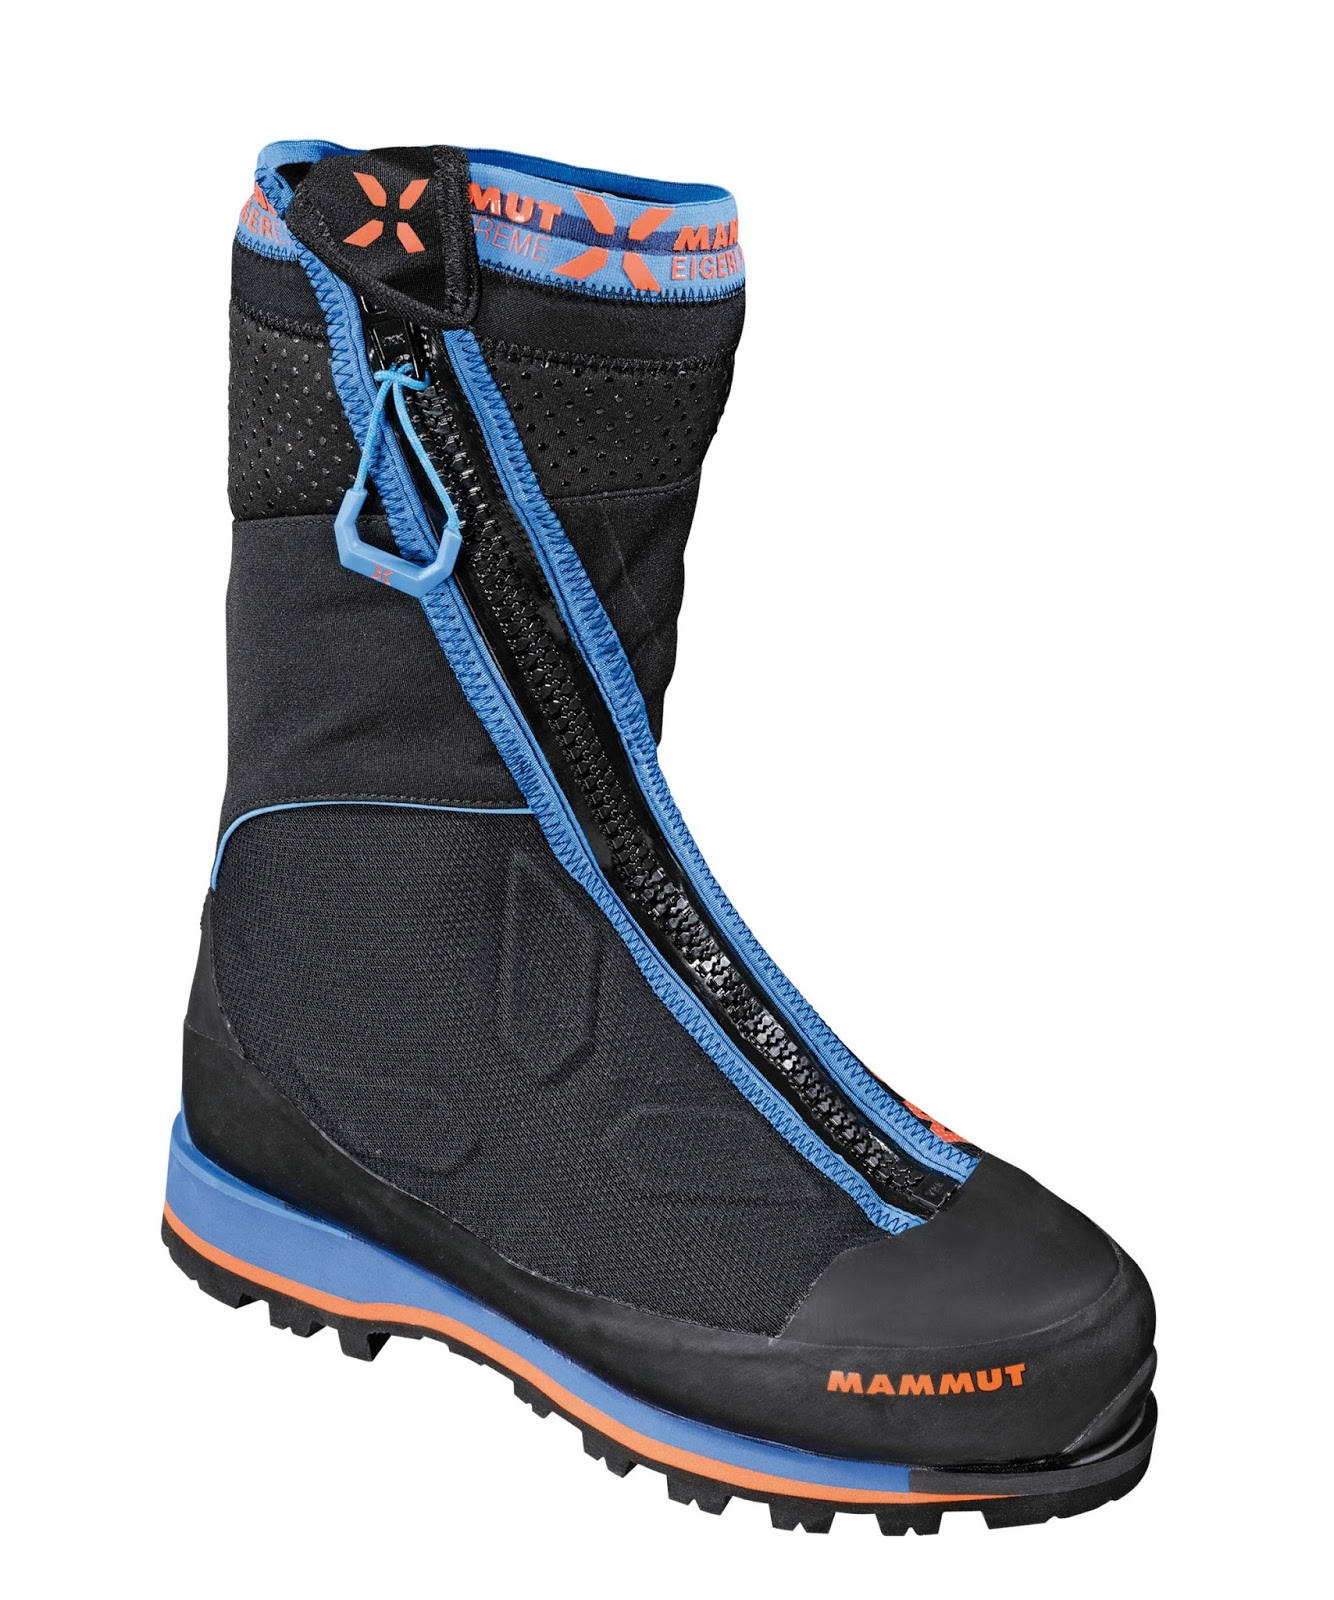 Cold Thistle Mammut Eiger  Extreme Nordwand TL Boots